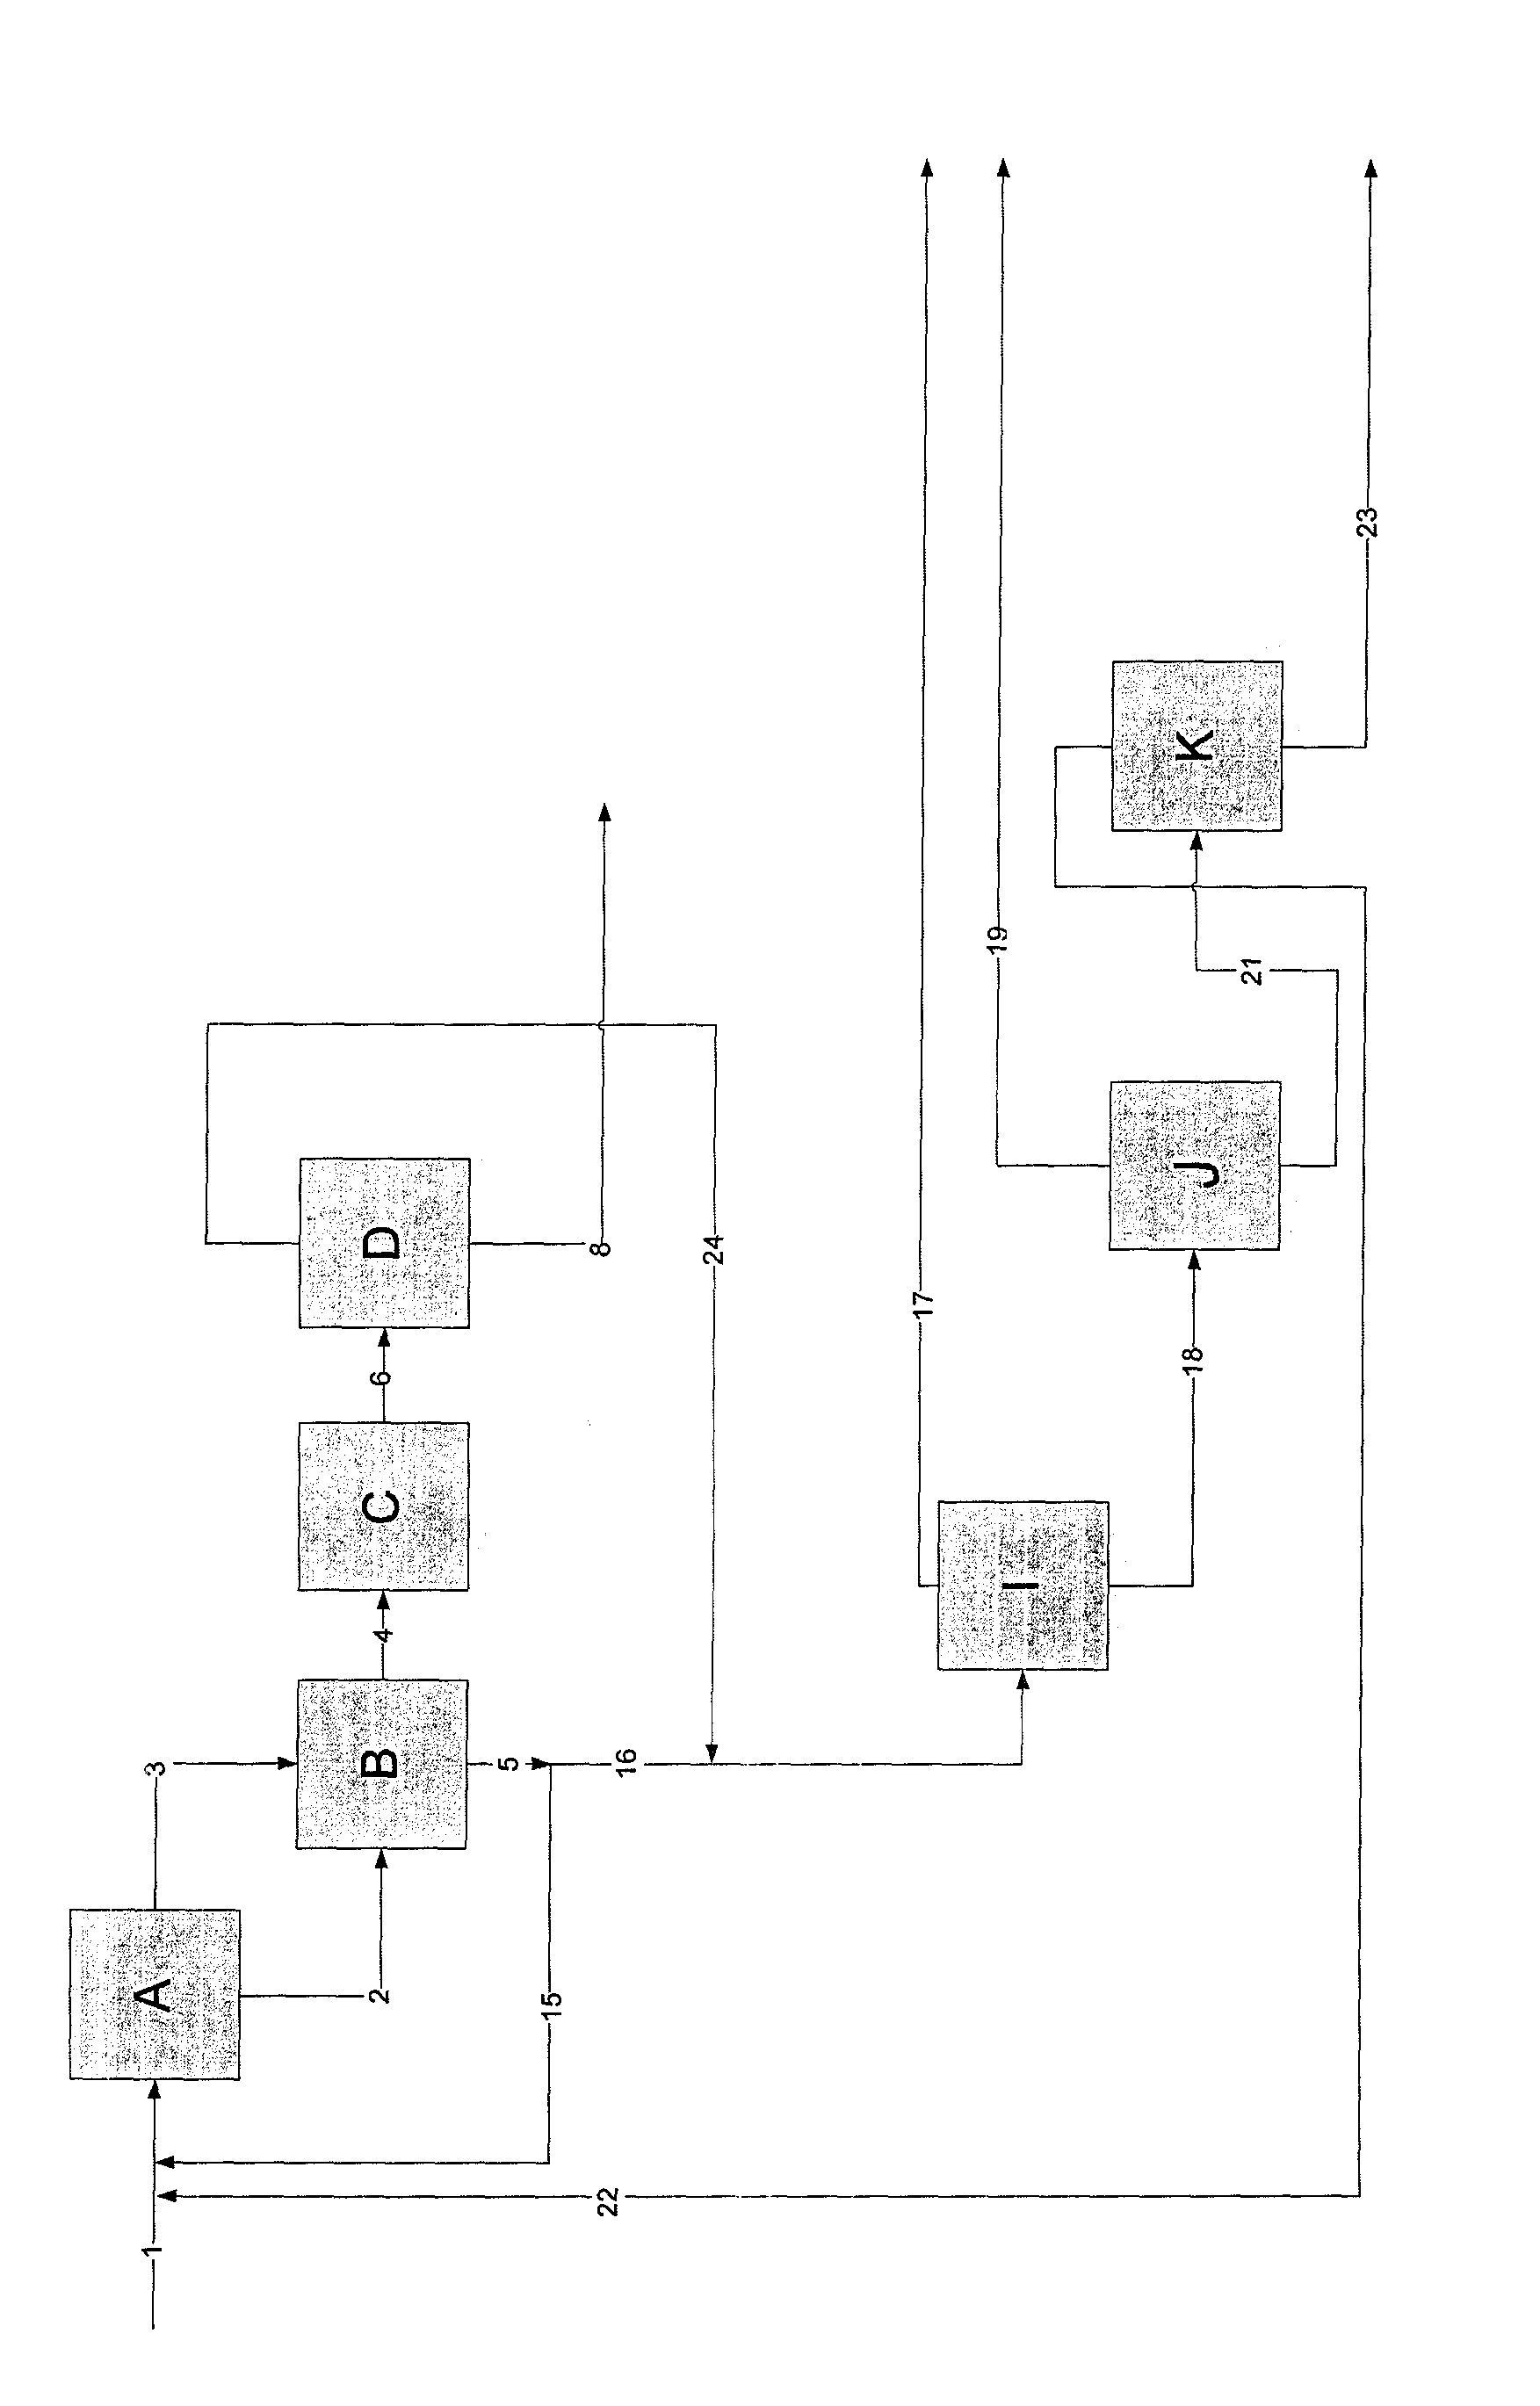 Method for isolation of laurolactam from a laurolactam synthesis process stream